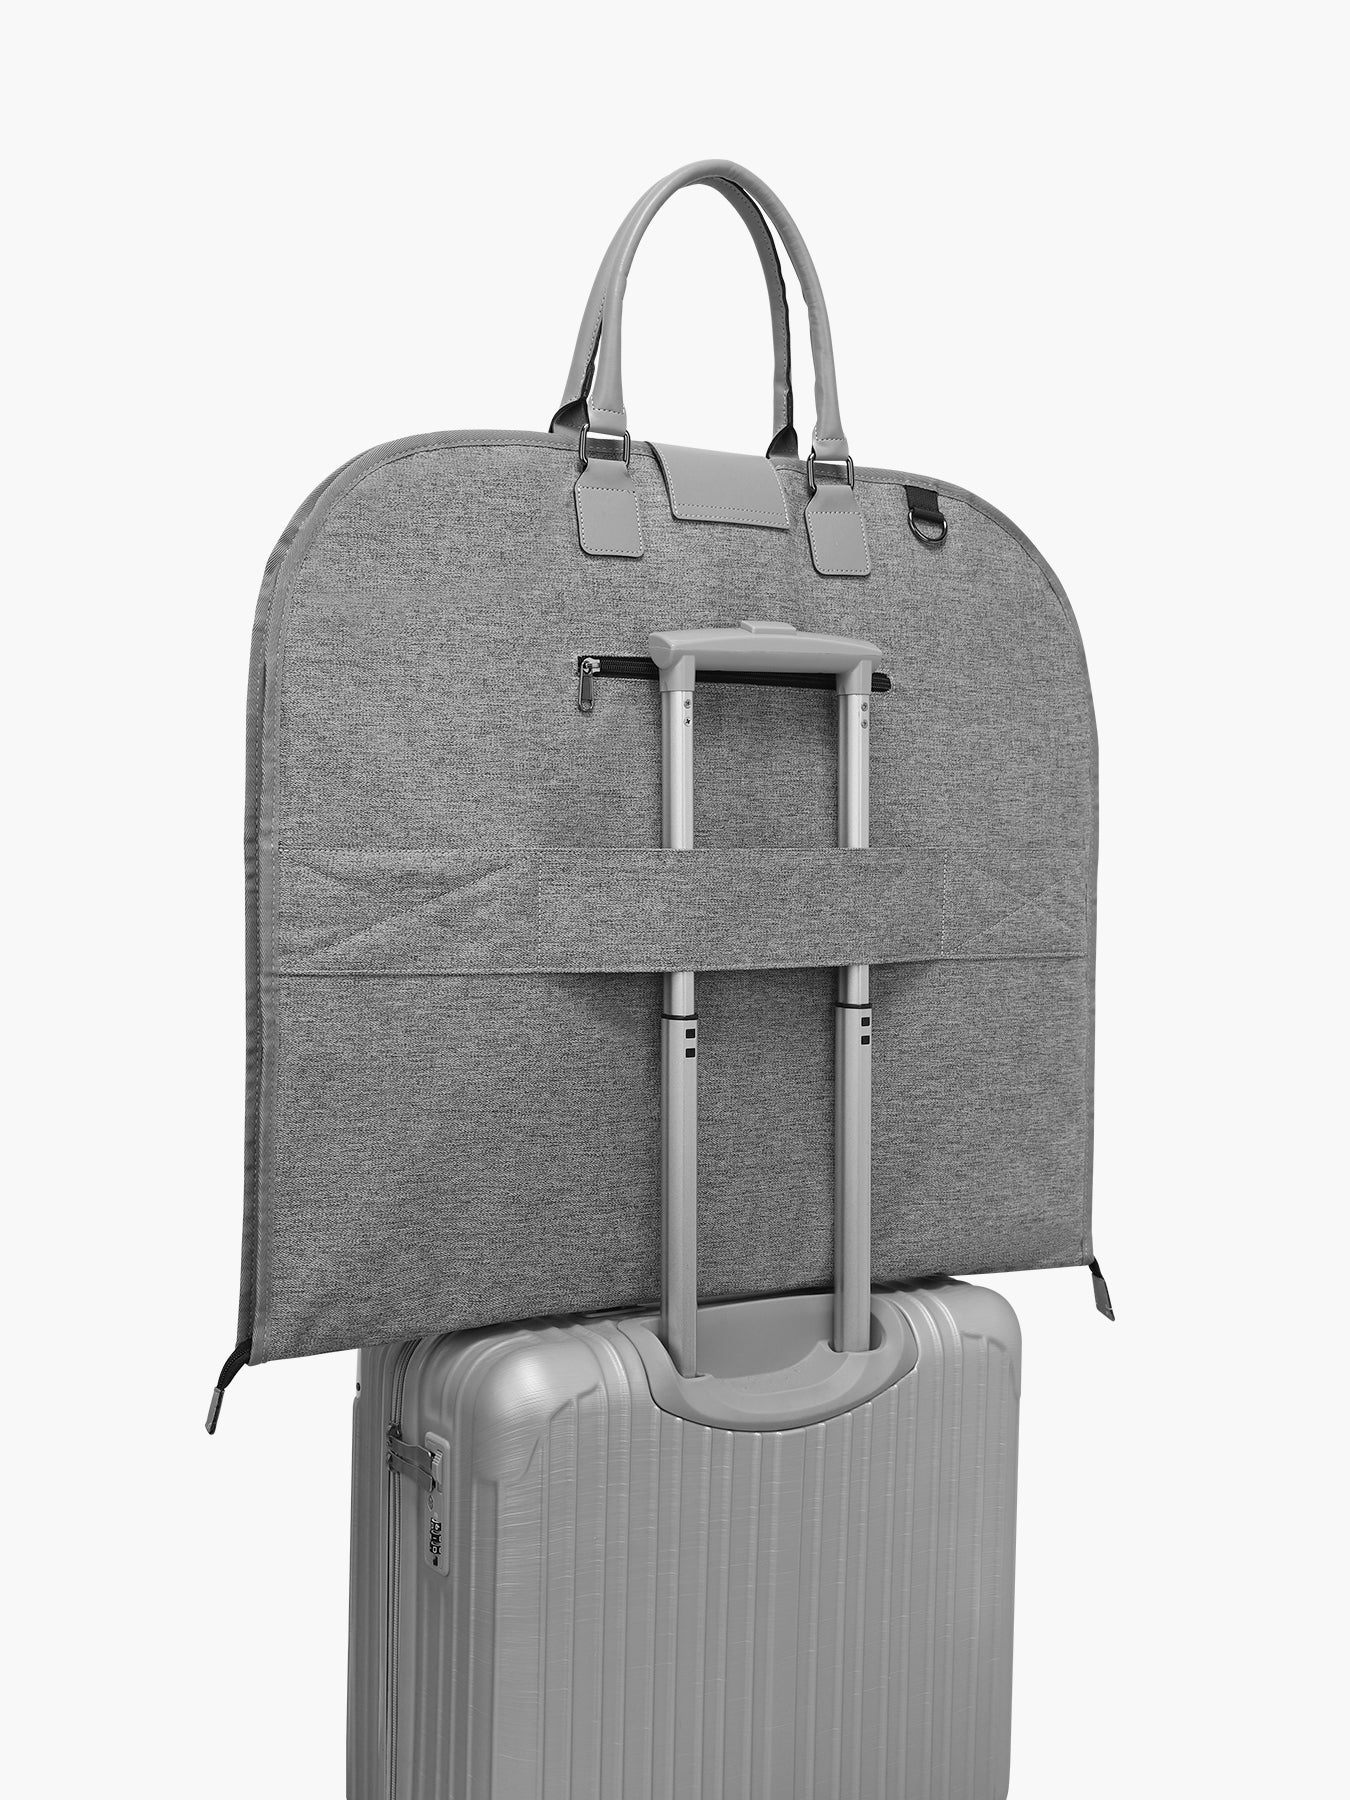 Modoker Carry On Garment Bag--No Wrinkles Trouble Your Dress or Suits Any  More. - Modoker